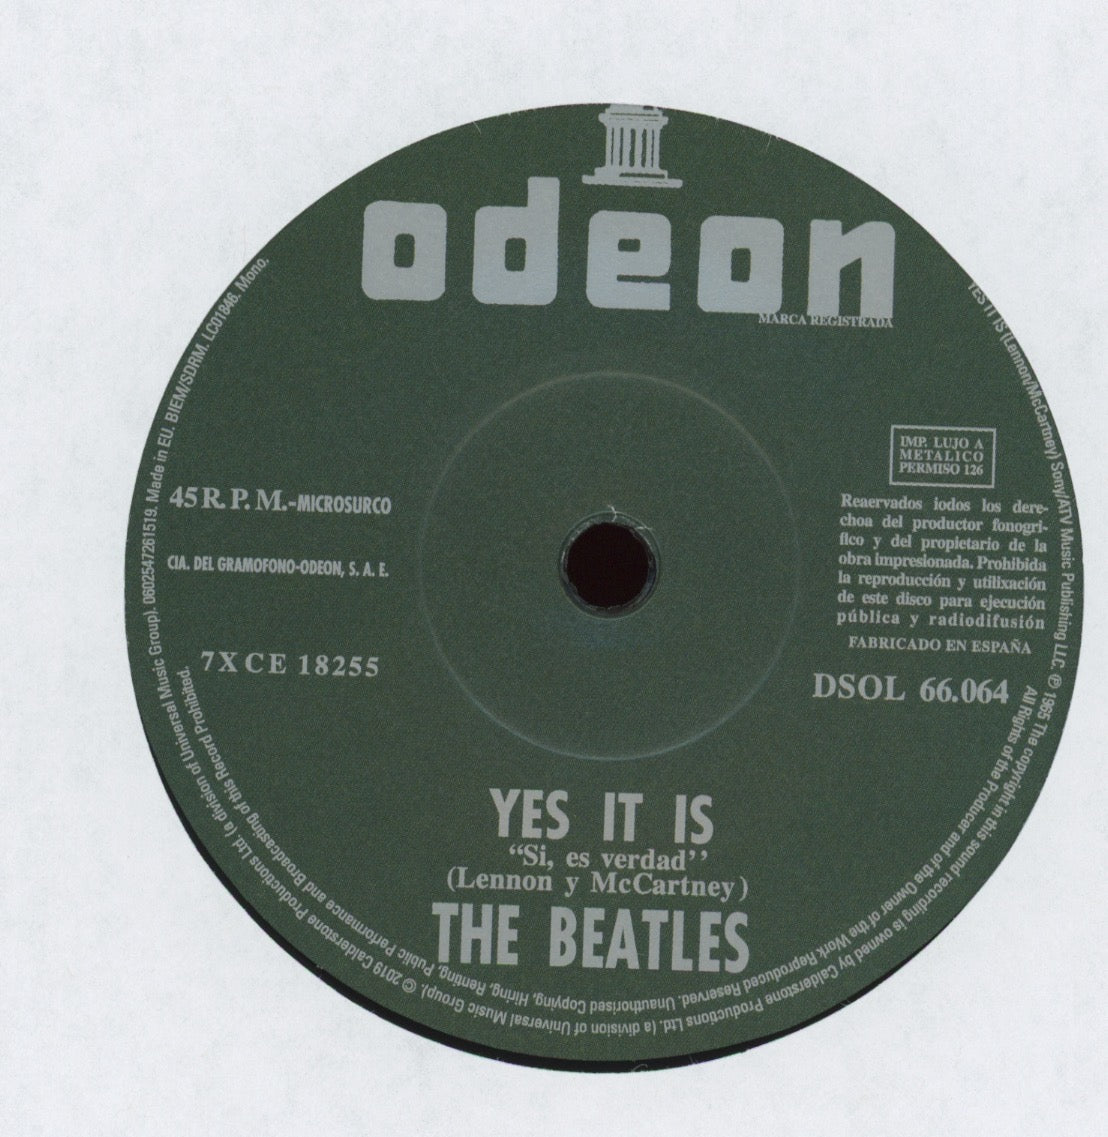 The Beatles - Ticket To Ride / Yes It Is on Odeon 7" Reissue With Picture Cover